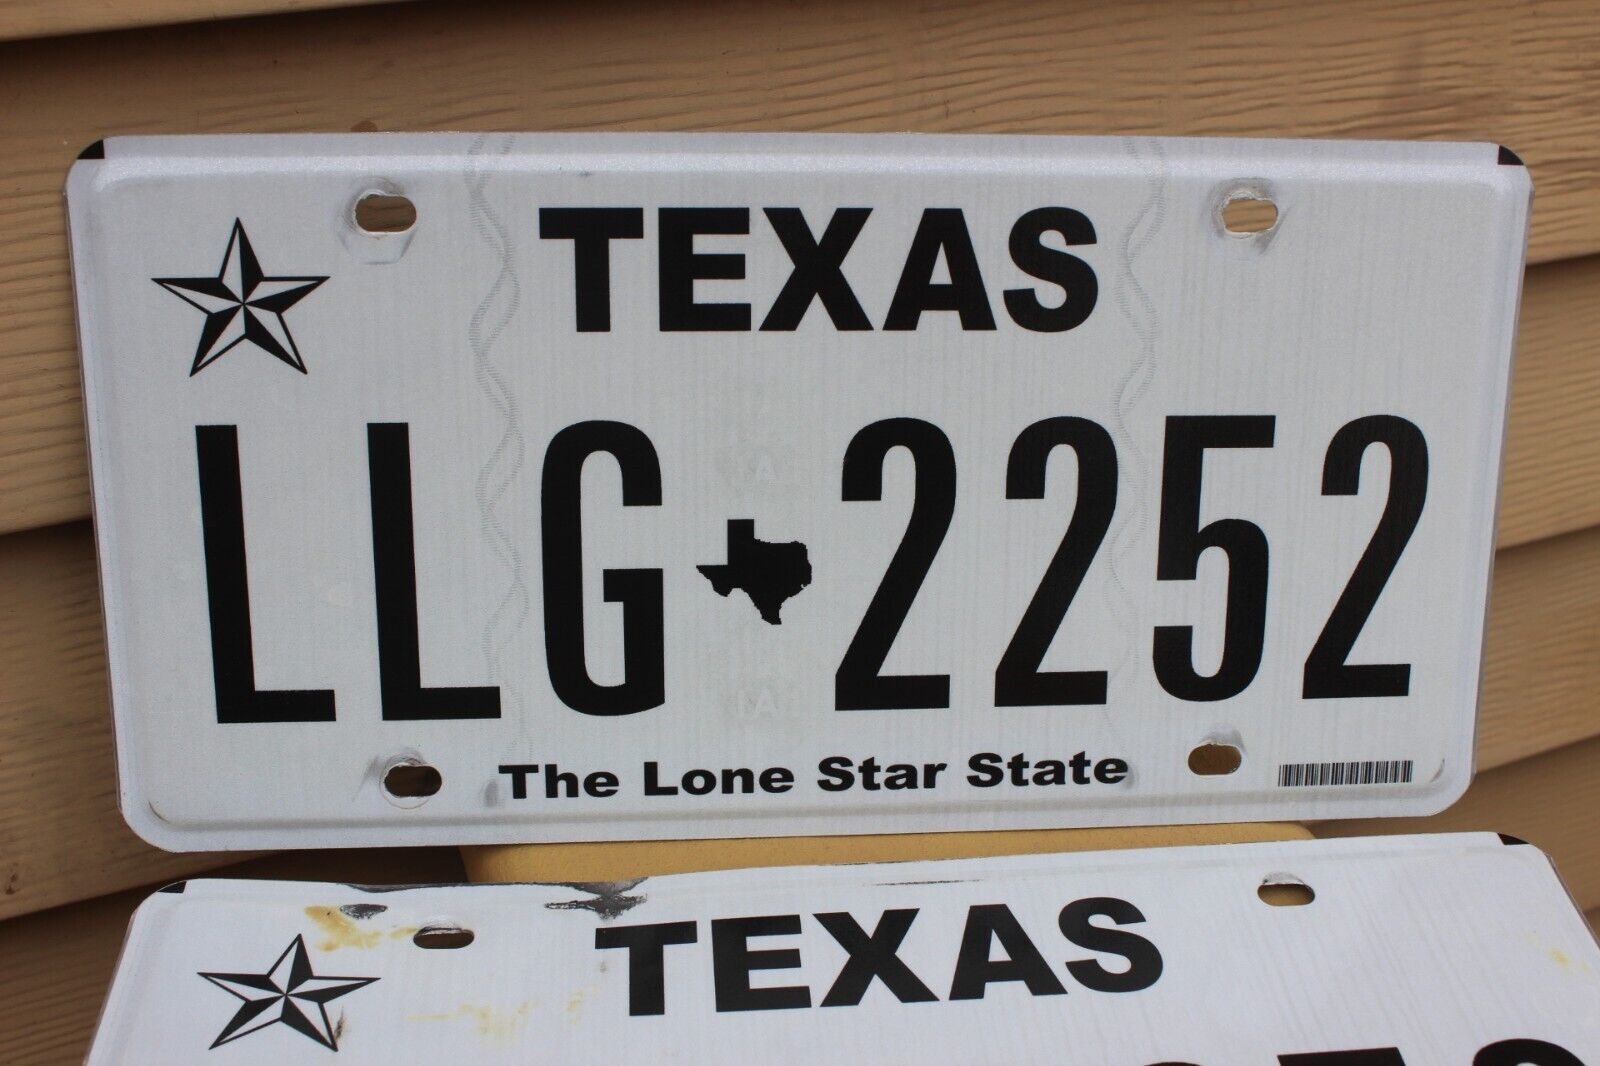 2018 TEXAS Genuine Automobile License Plates PAIR The Lone Star State Very Cool